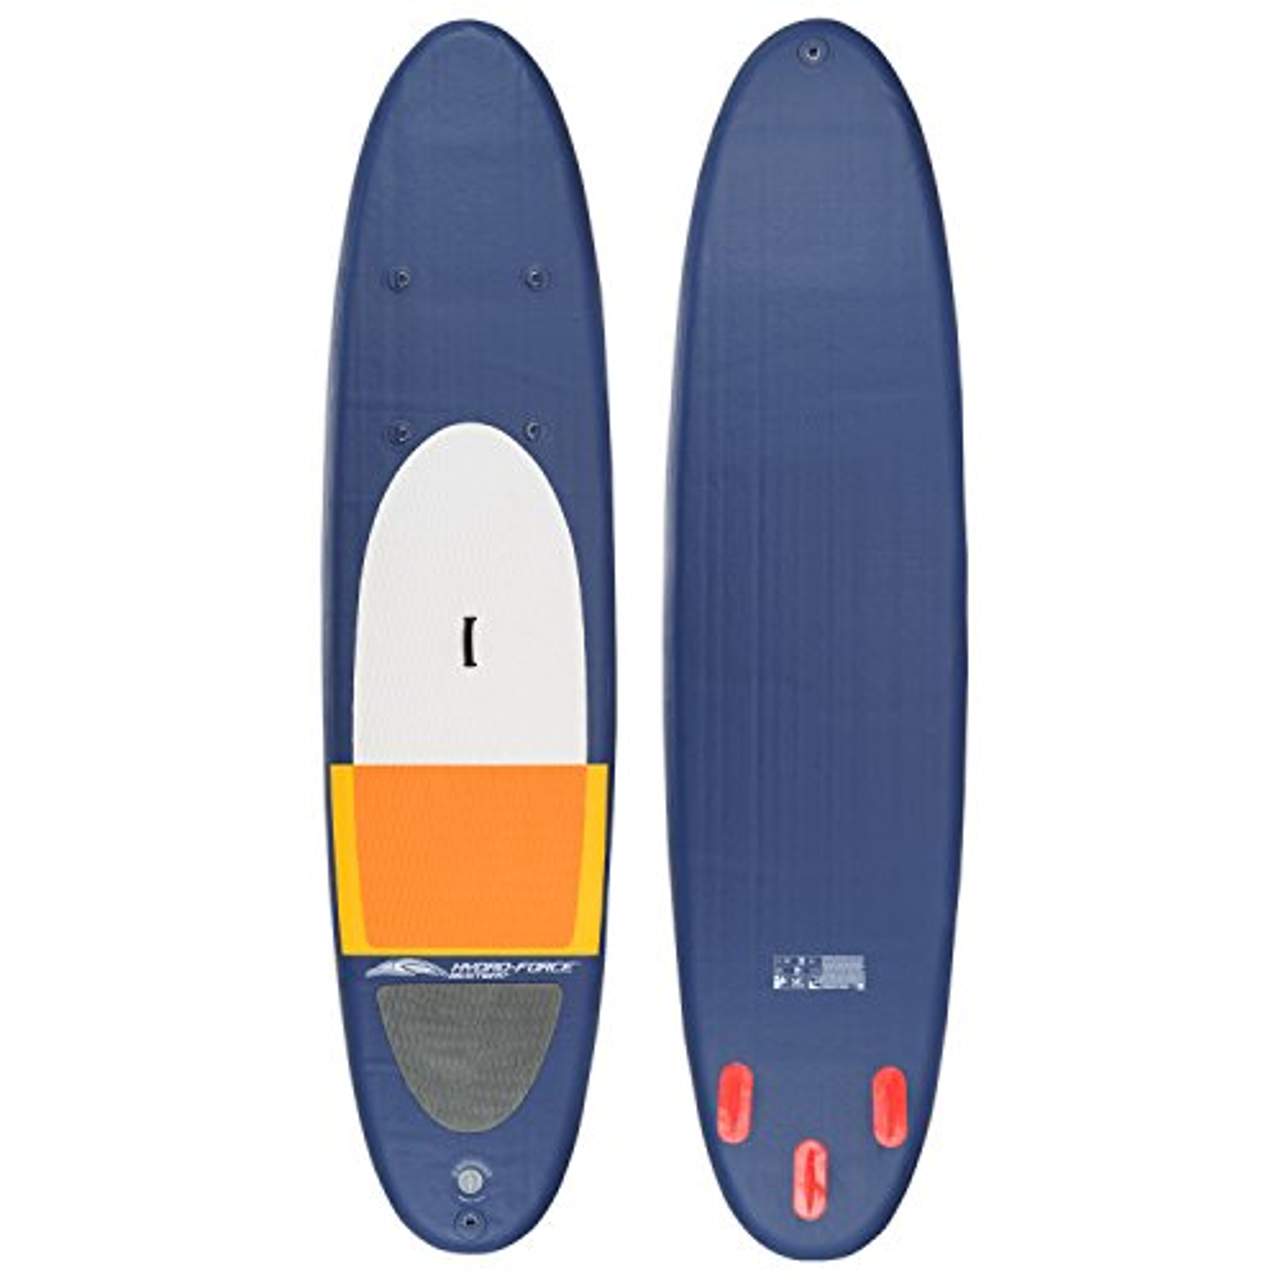 Bestway SUP Stand Up Surfboard Coast Liner